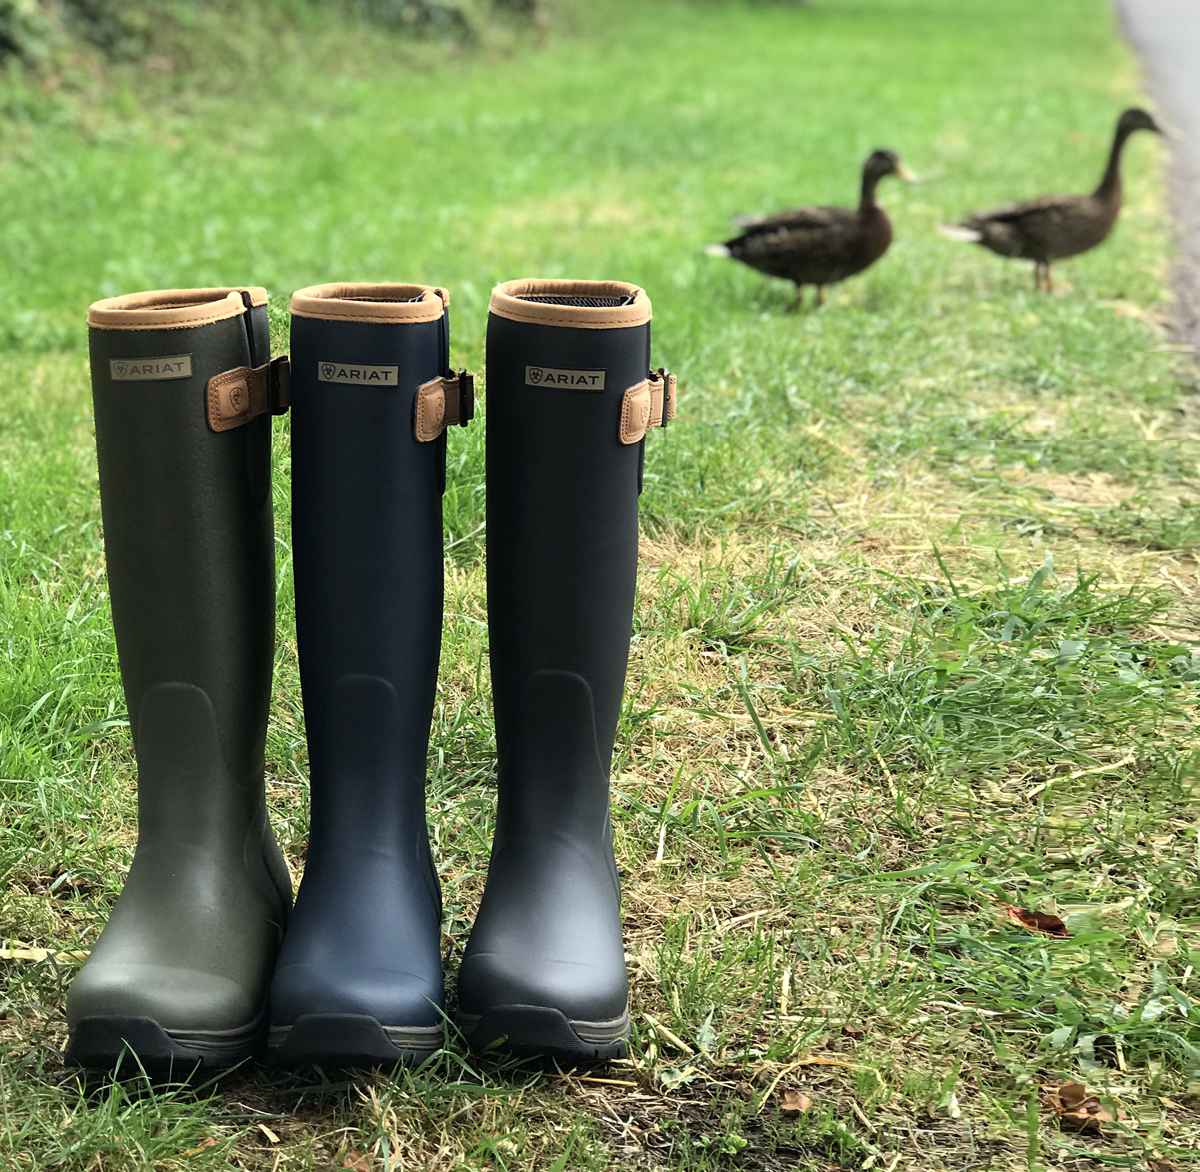 Ariat Burford Insulated Wellington Boots